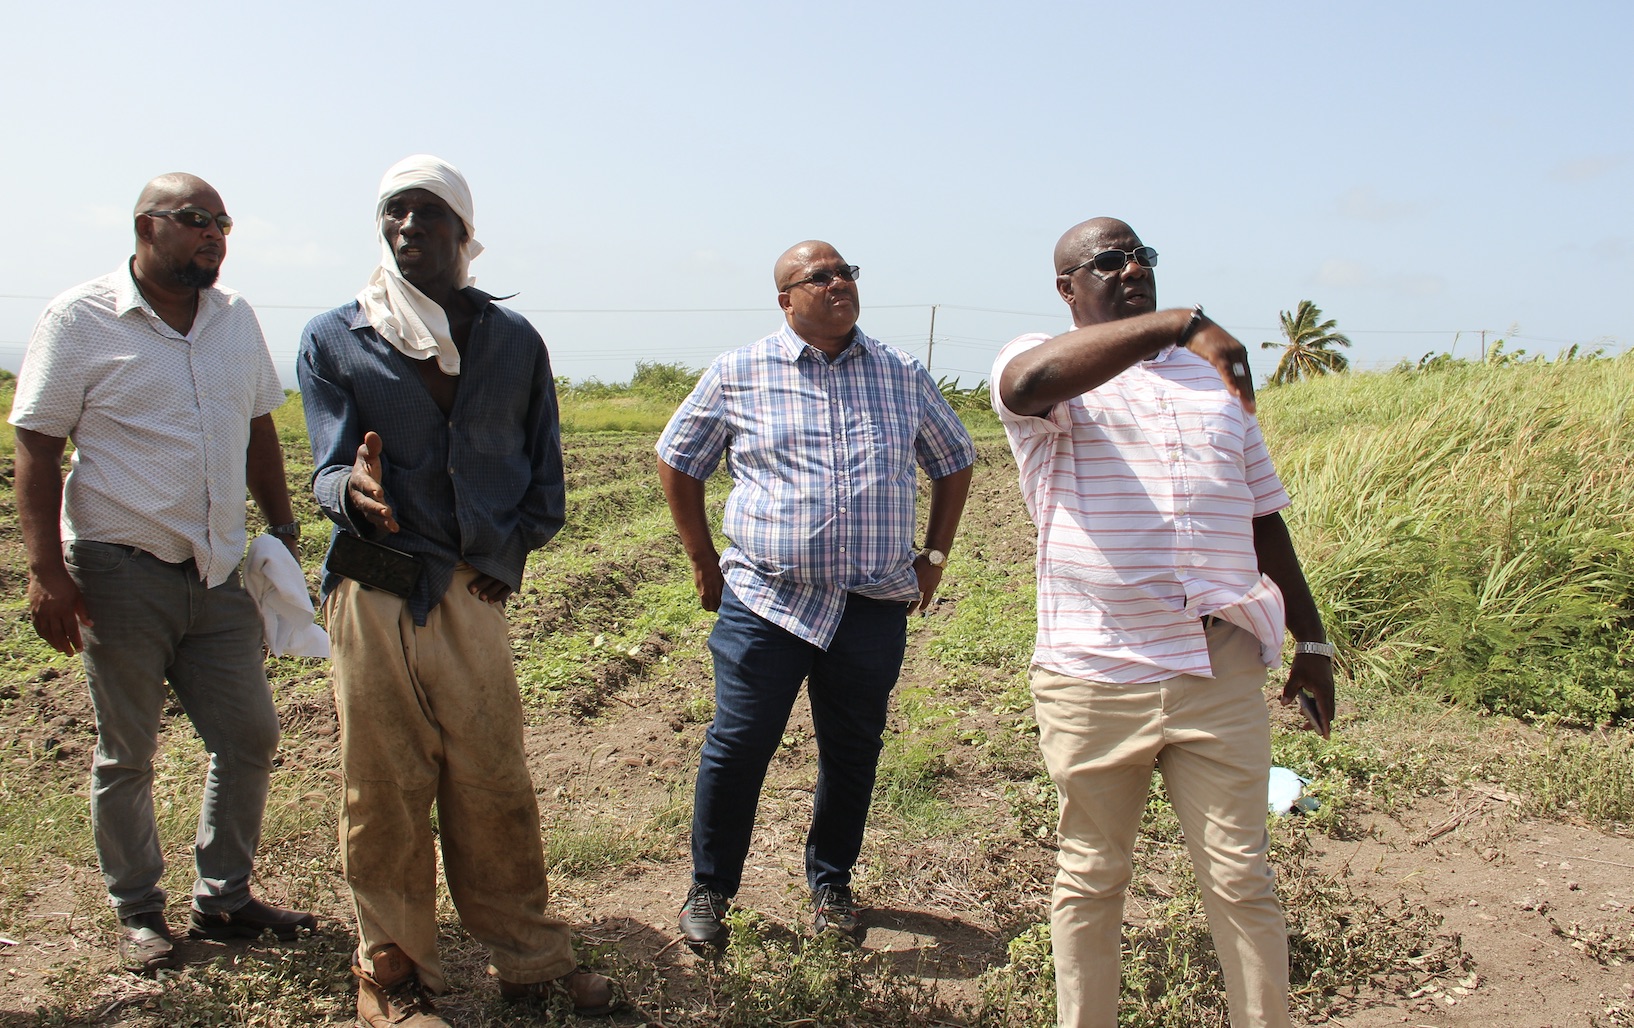 l-r) Mr. Huey Sargeant, Permanent Secretary in the Ministry of Agriculture on Nevis; Mr. Ron Dublin-Collins, Permanent Secretary in the Ministry of Agriculture in St. Kitts (third from left); and Hon. Alexis Jeffers, Minister of Agriculture on Nevis and Minister of Agriculture in the Federal government; with Mr. Godwin “Mike” Browne (second from left) on his farm at New River during a tour on July 28, 2020